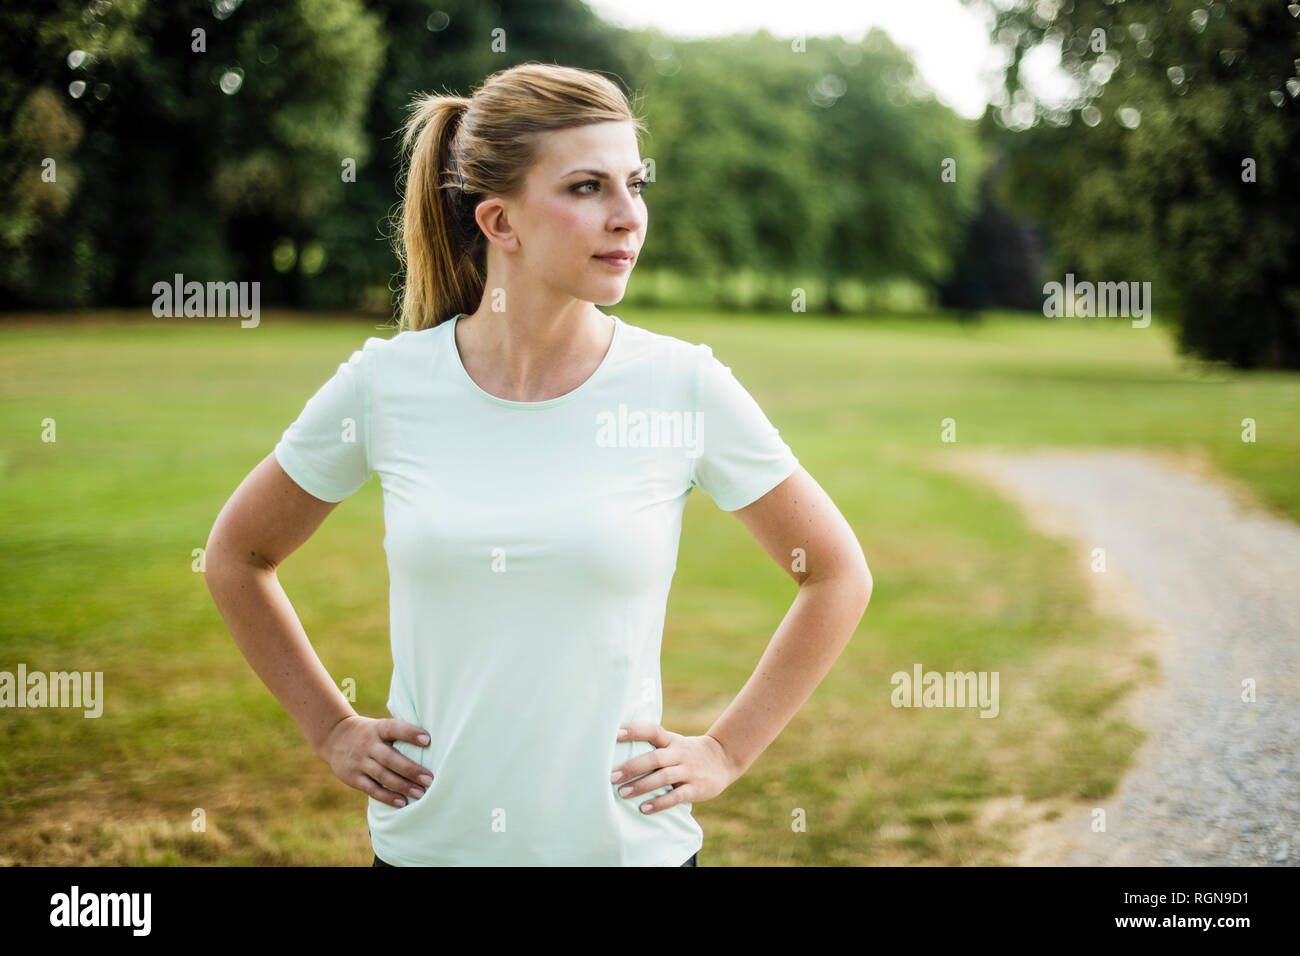 Sportive young woman standing in a park looking sideways Stock Photo